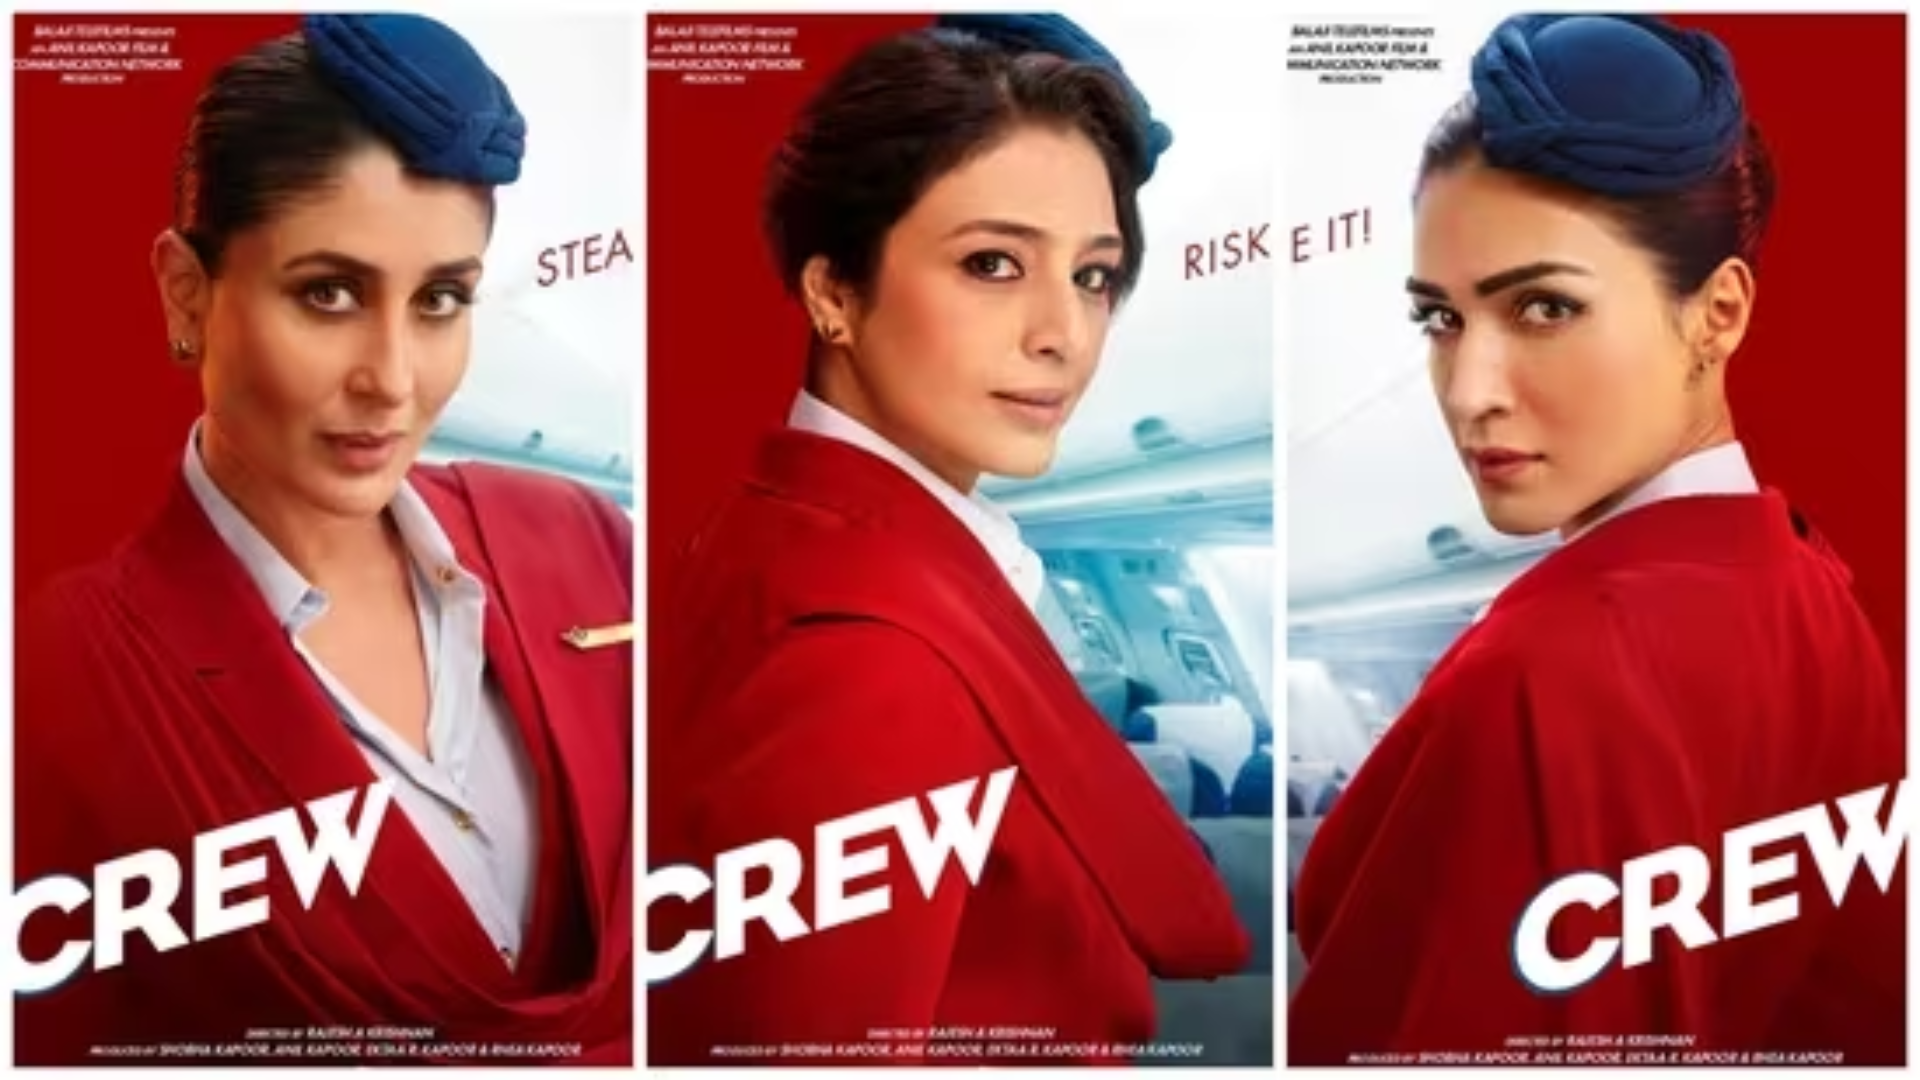 “Crew” 1st Look Poster OUT, Kareena, Tabu, and Kriti Dazzling In Red